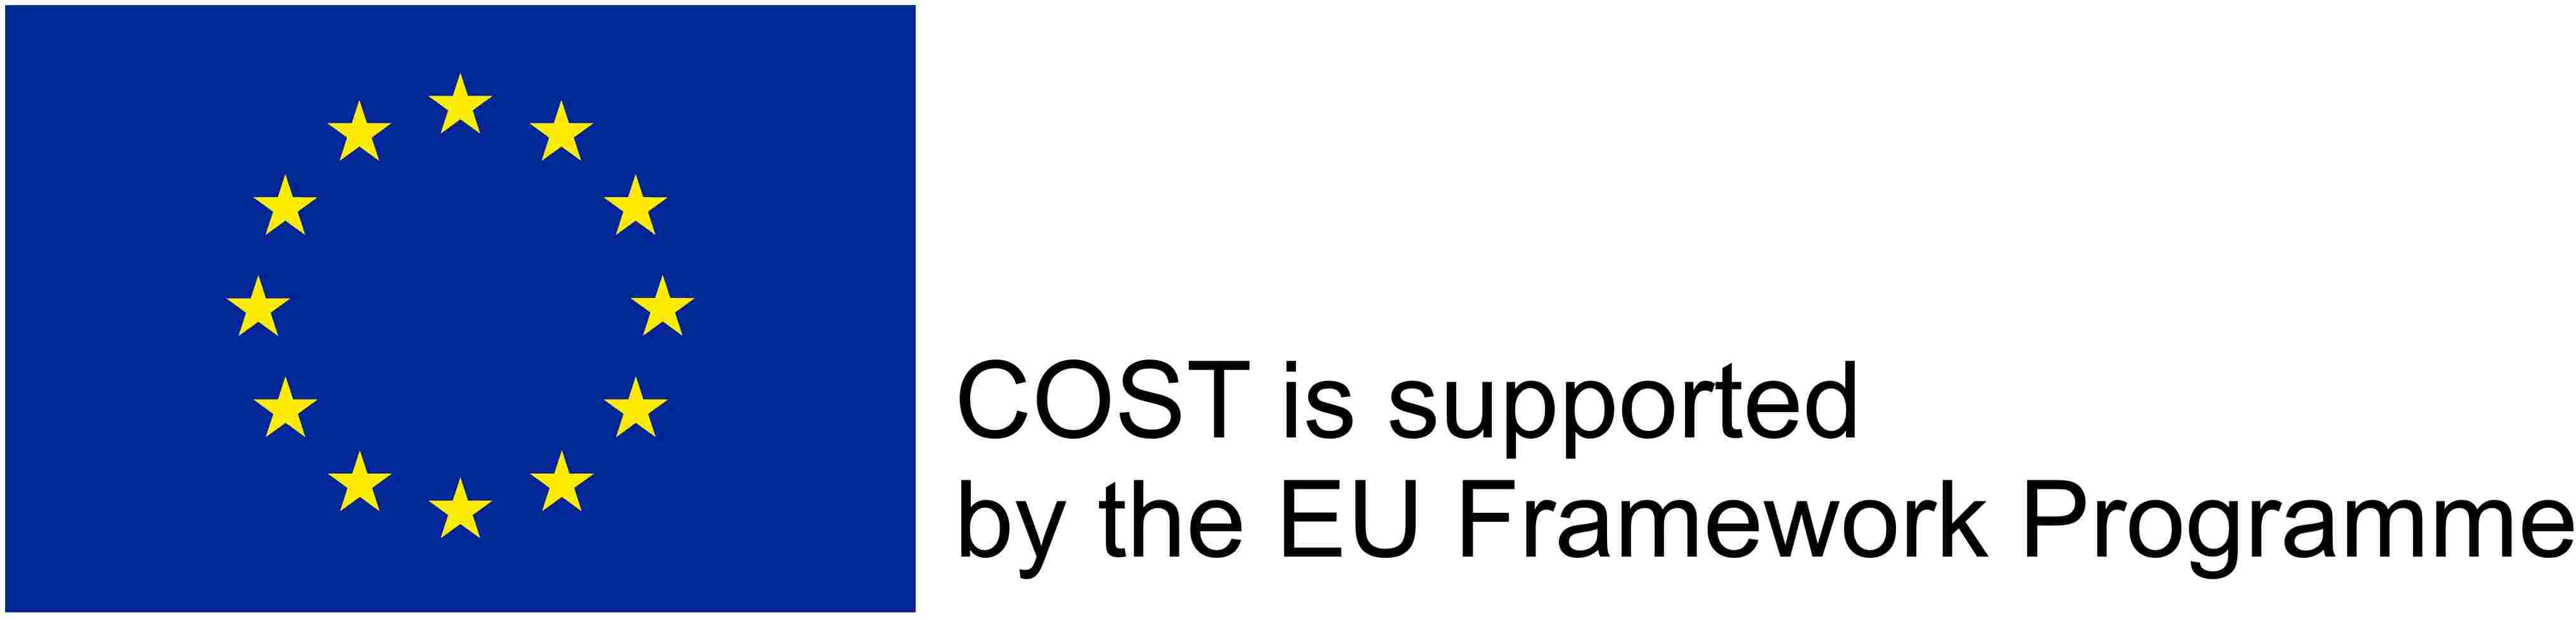 COST is supported by the EU Framework Programme Horizon 2020